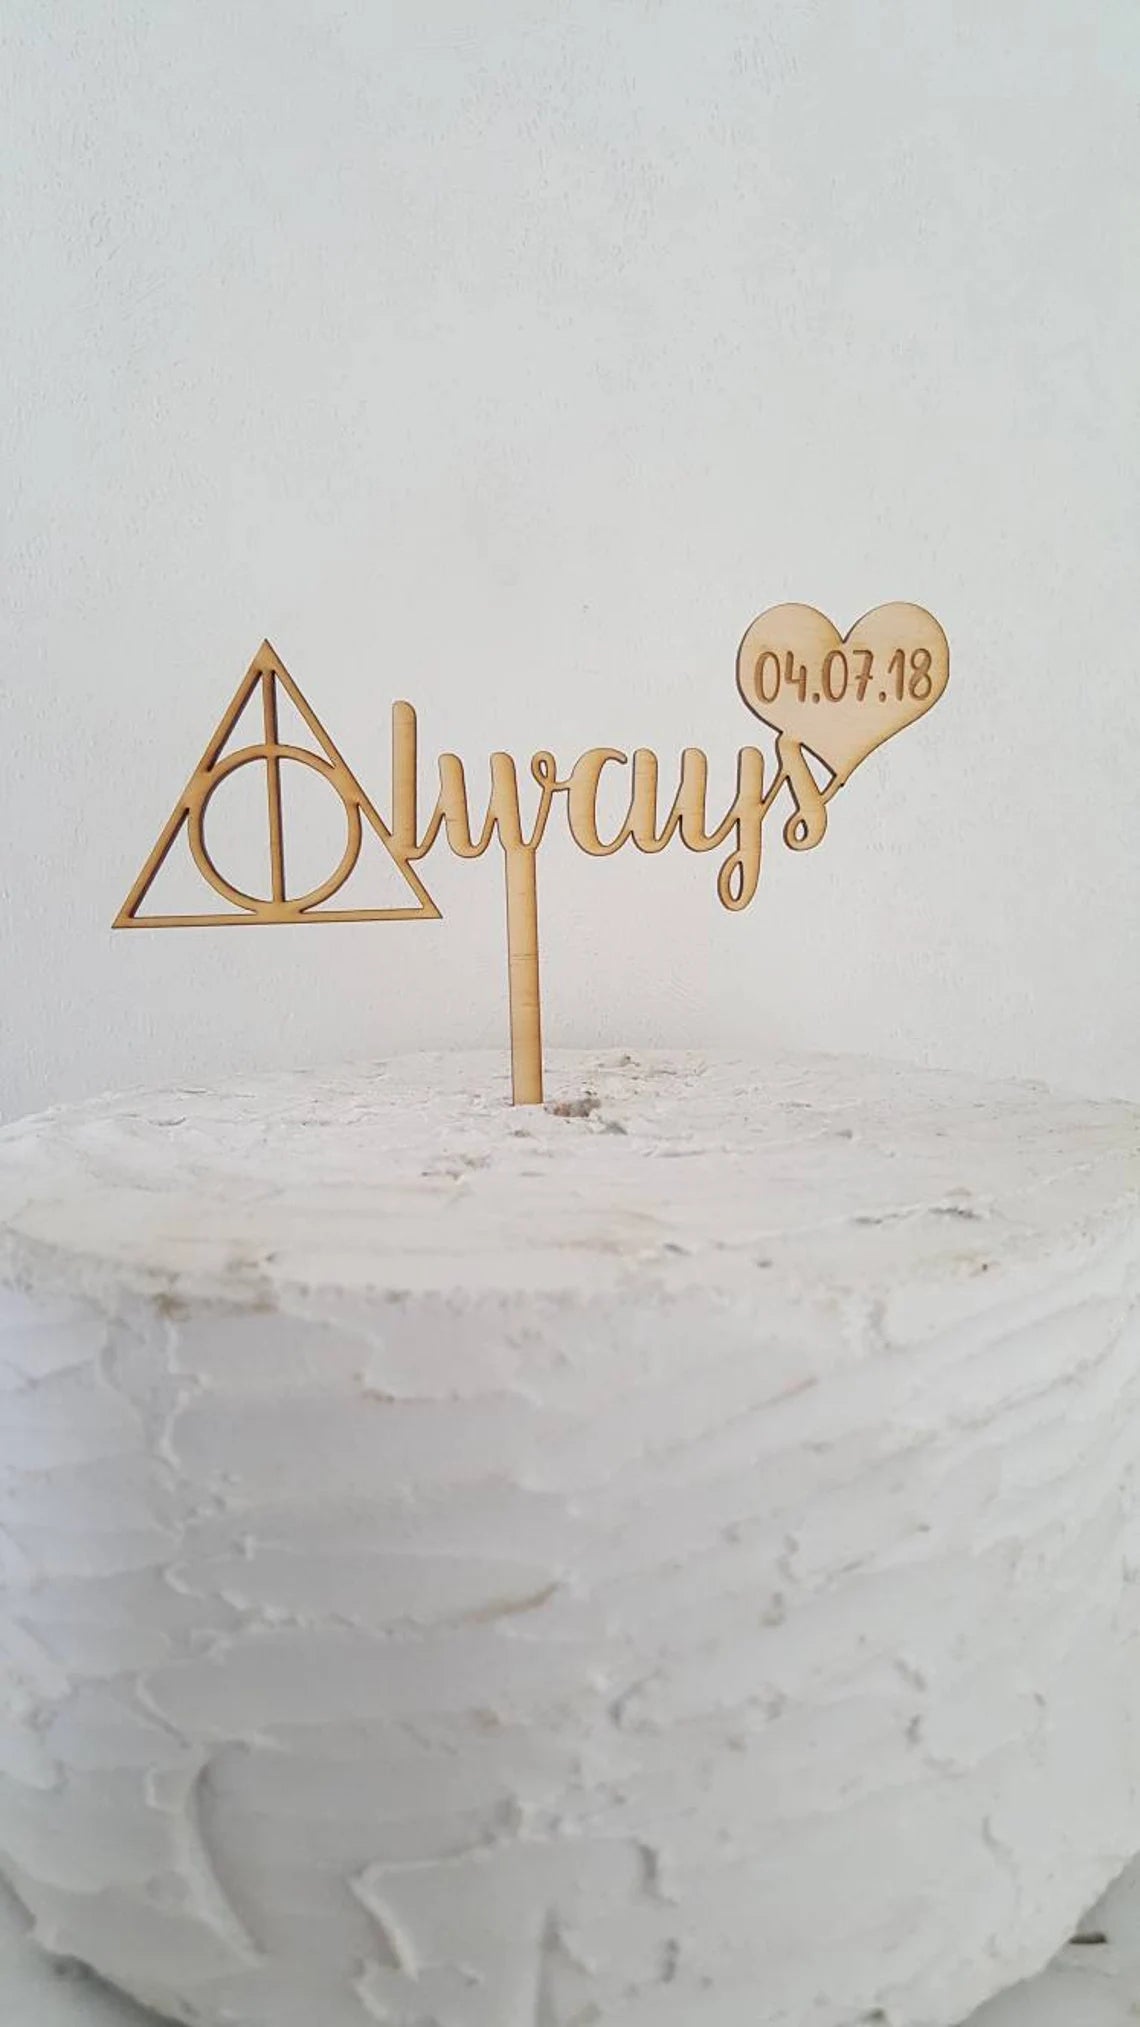 Custom Inspired Always with Heart and Date Love Wedding or Anniversary Laser Cut Natural Wood Cake Topper Decoration